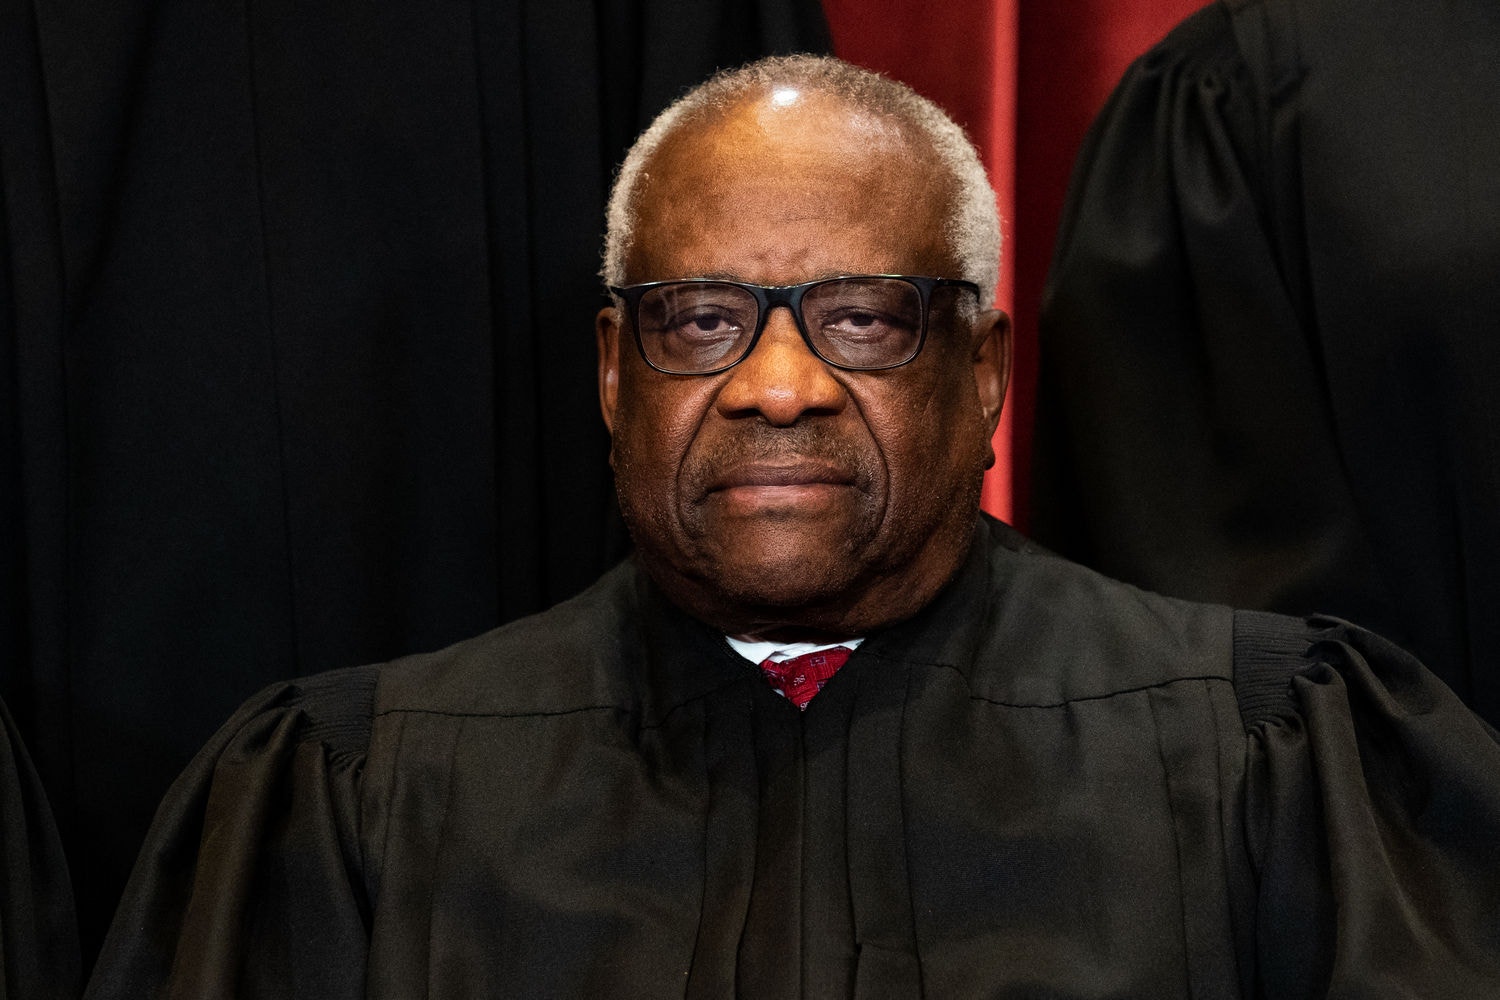 (FILES) Associate Justice Clarence Thomas sits during a group photo of the Justices at the Supreme Court in Washington, DC on April 23, 2021. US Supreme Court Justice Clarence Thomas, who has found himself under scrutiny over his judicial decisions and accepting lavish gifts from a billionaire Republican, is dismissing the criticism as "nastiness" and "lies," according to US media on May 11, 2024. (Photo by Erin Schaff / POOL / AFP)